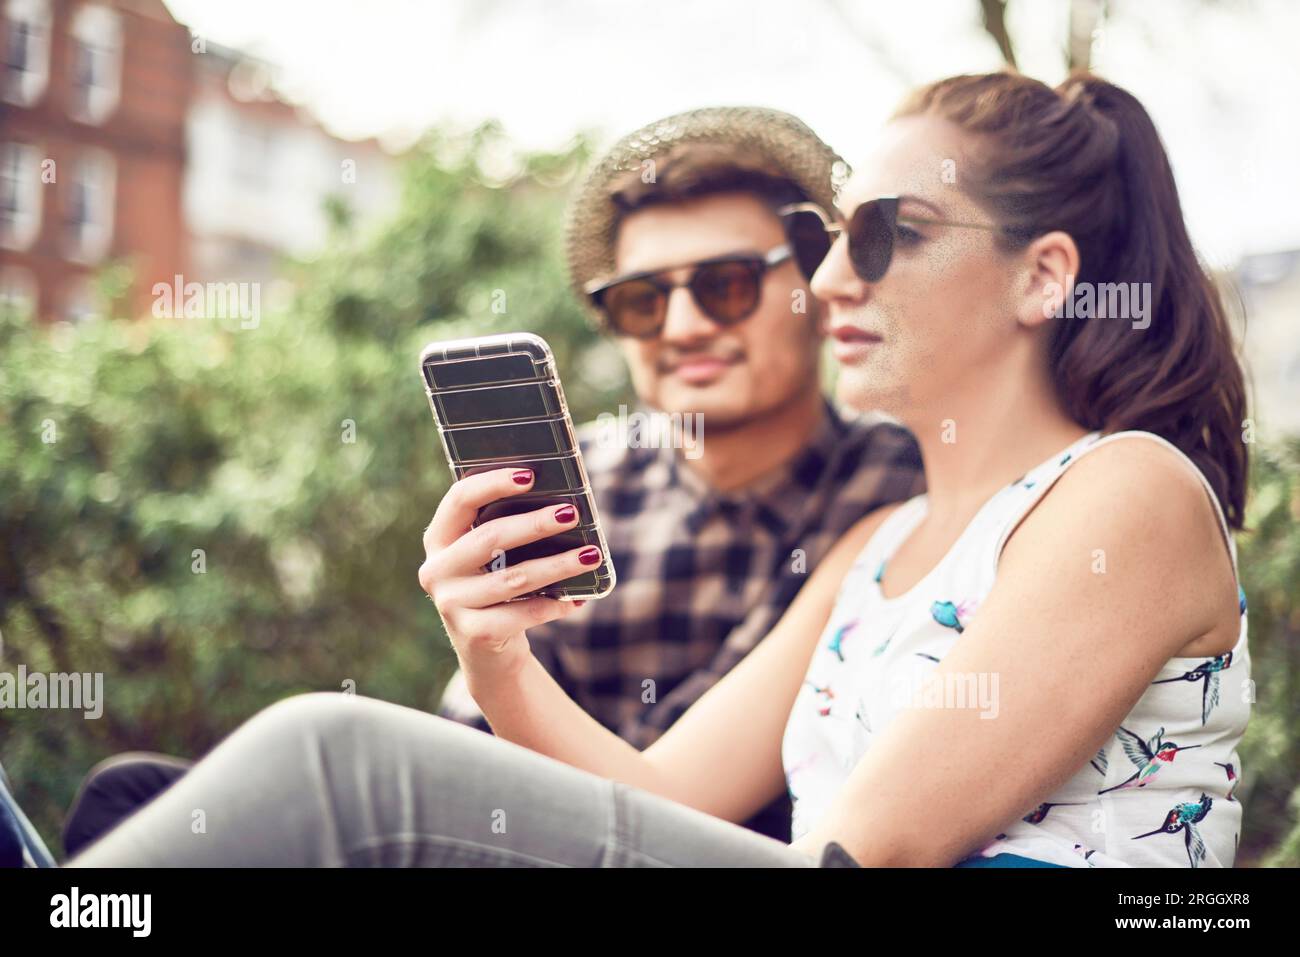 Teenage couple sitting in park Banque D'Images